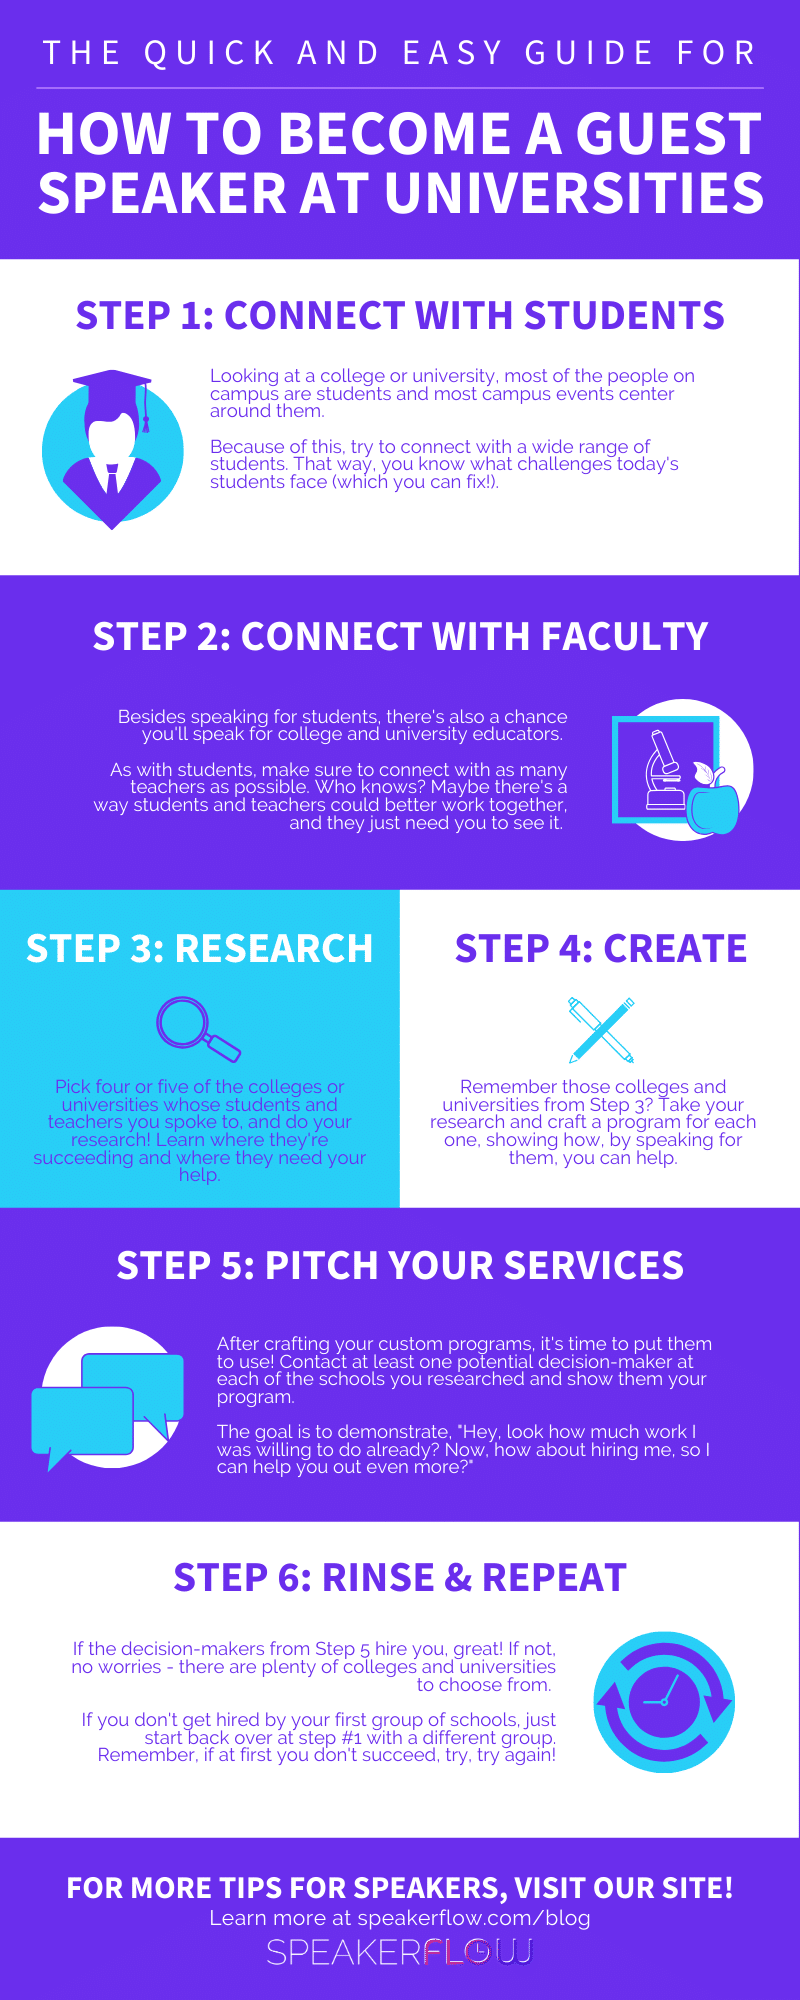 Infographic for The Quick And Easy Guide For How To Become A Guest Speaker At Universities - SpeakerFlow